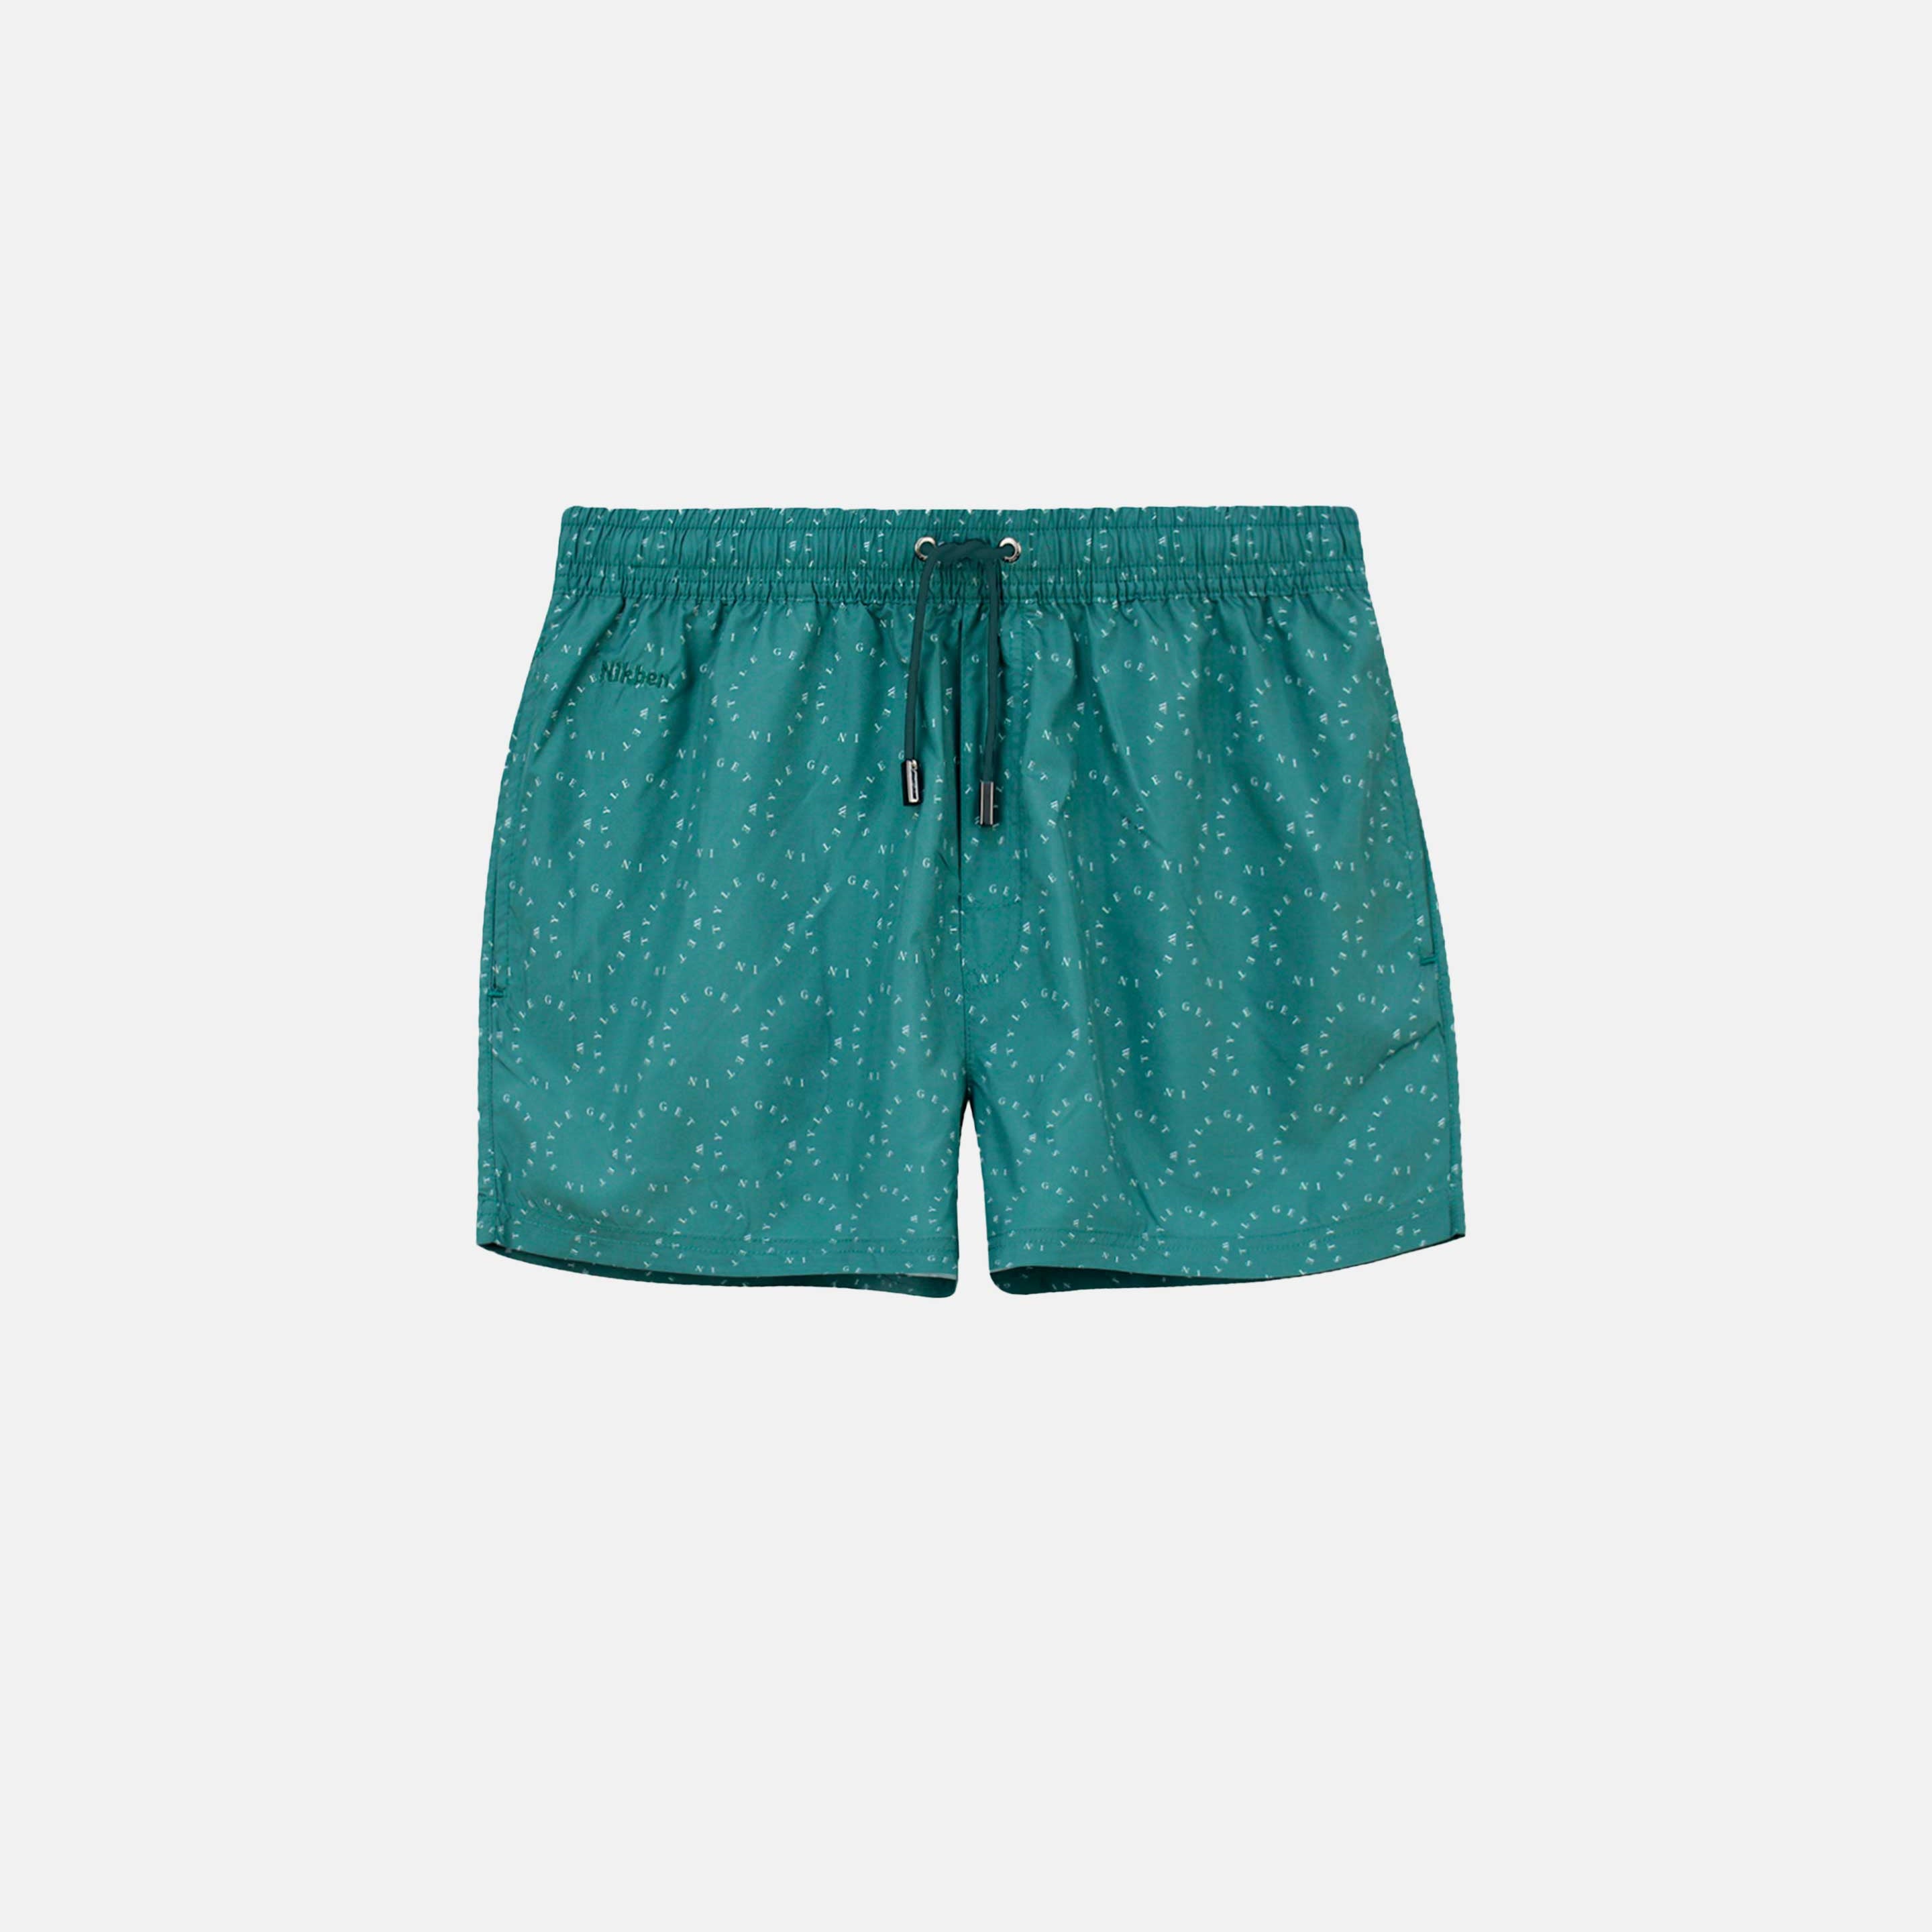 Green swim trunks with logo. Mid length shorts with drawstring waistband and two side pockets.